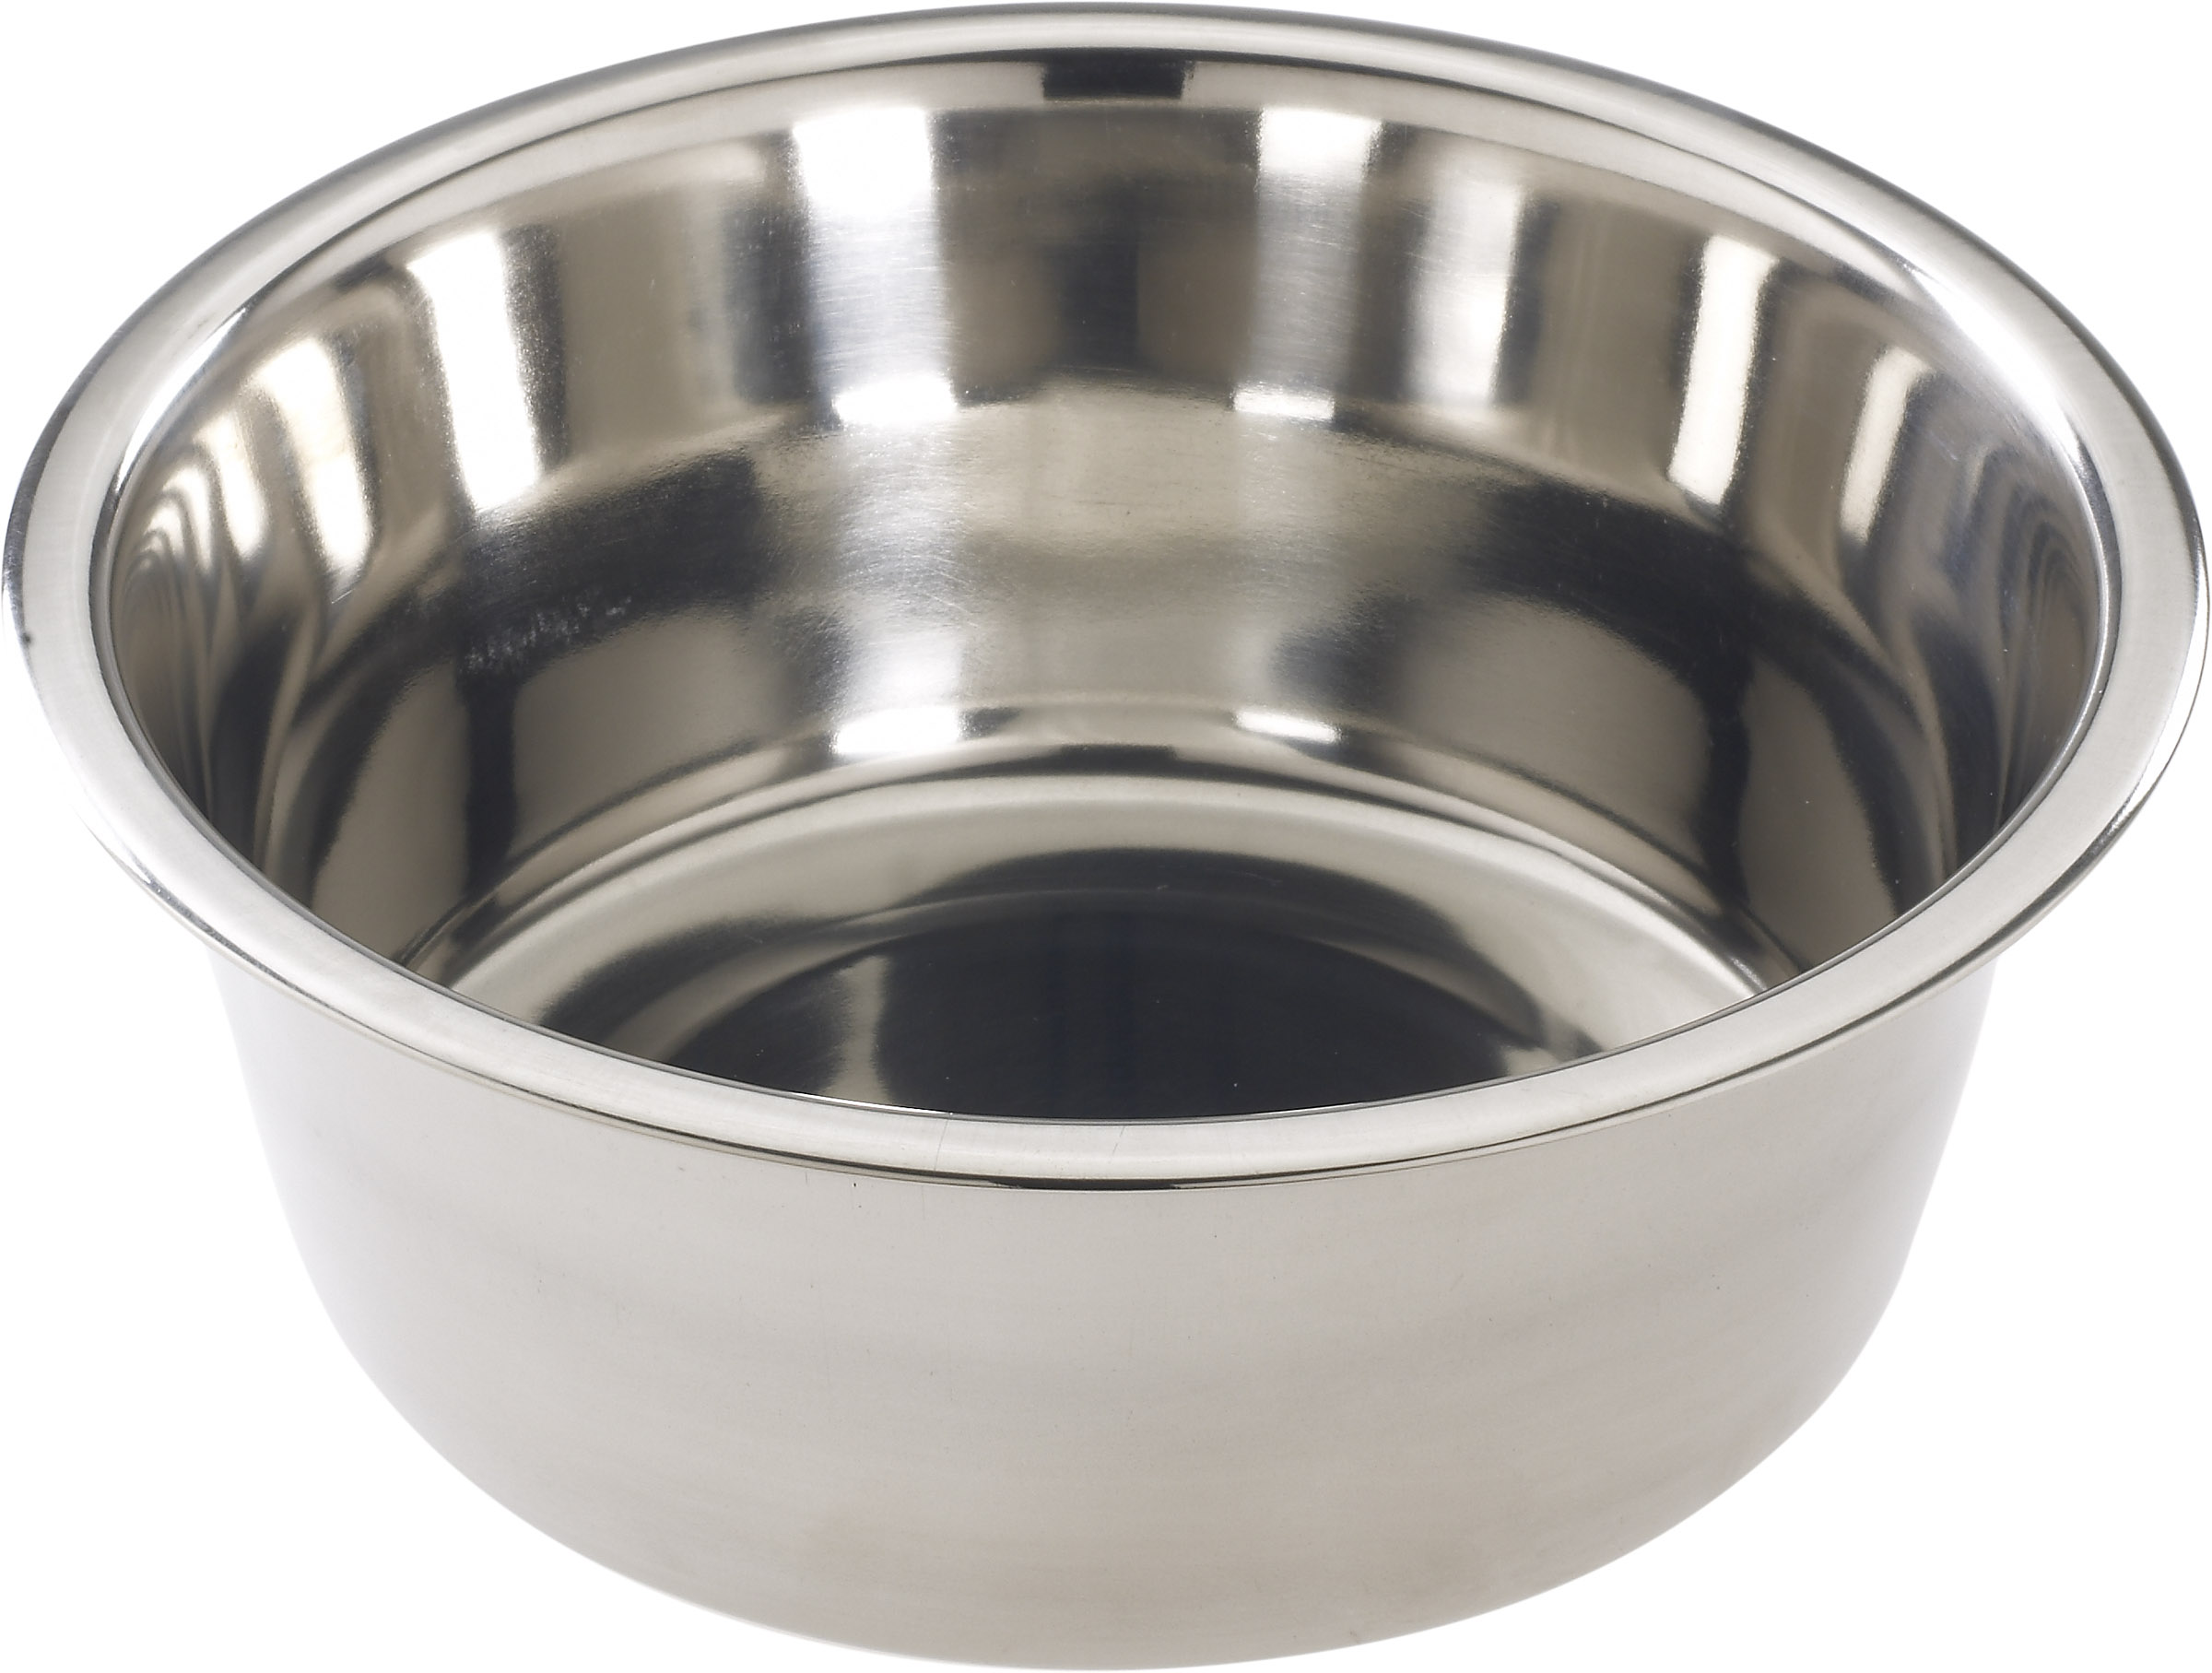 Stainless Steel Dish, 1 qt.